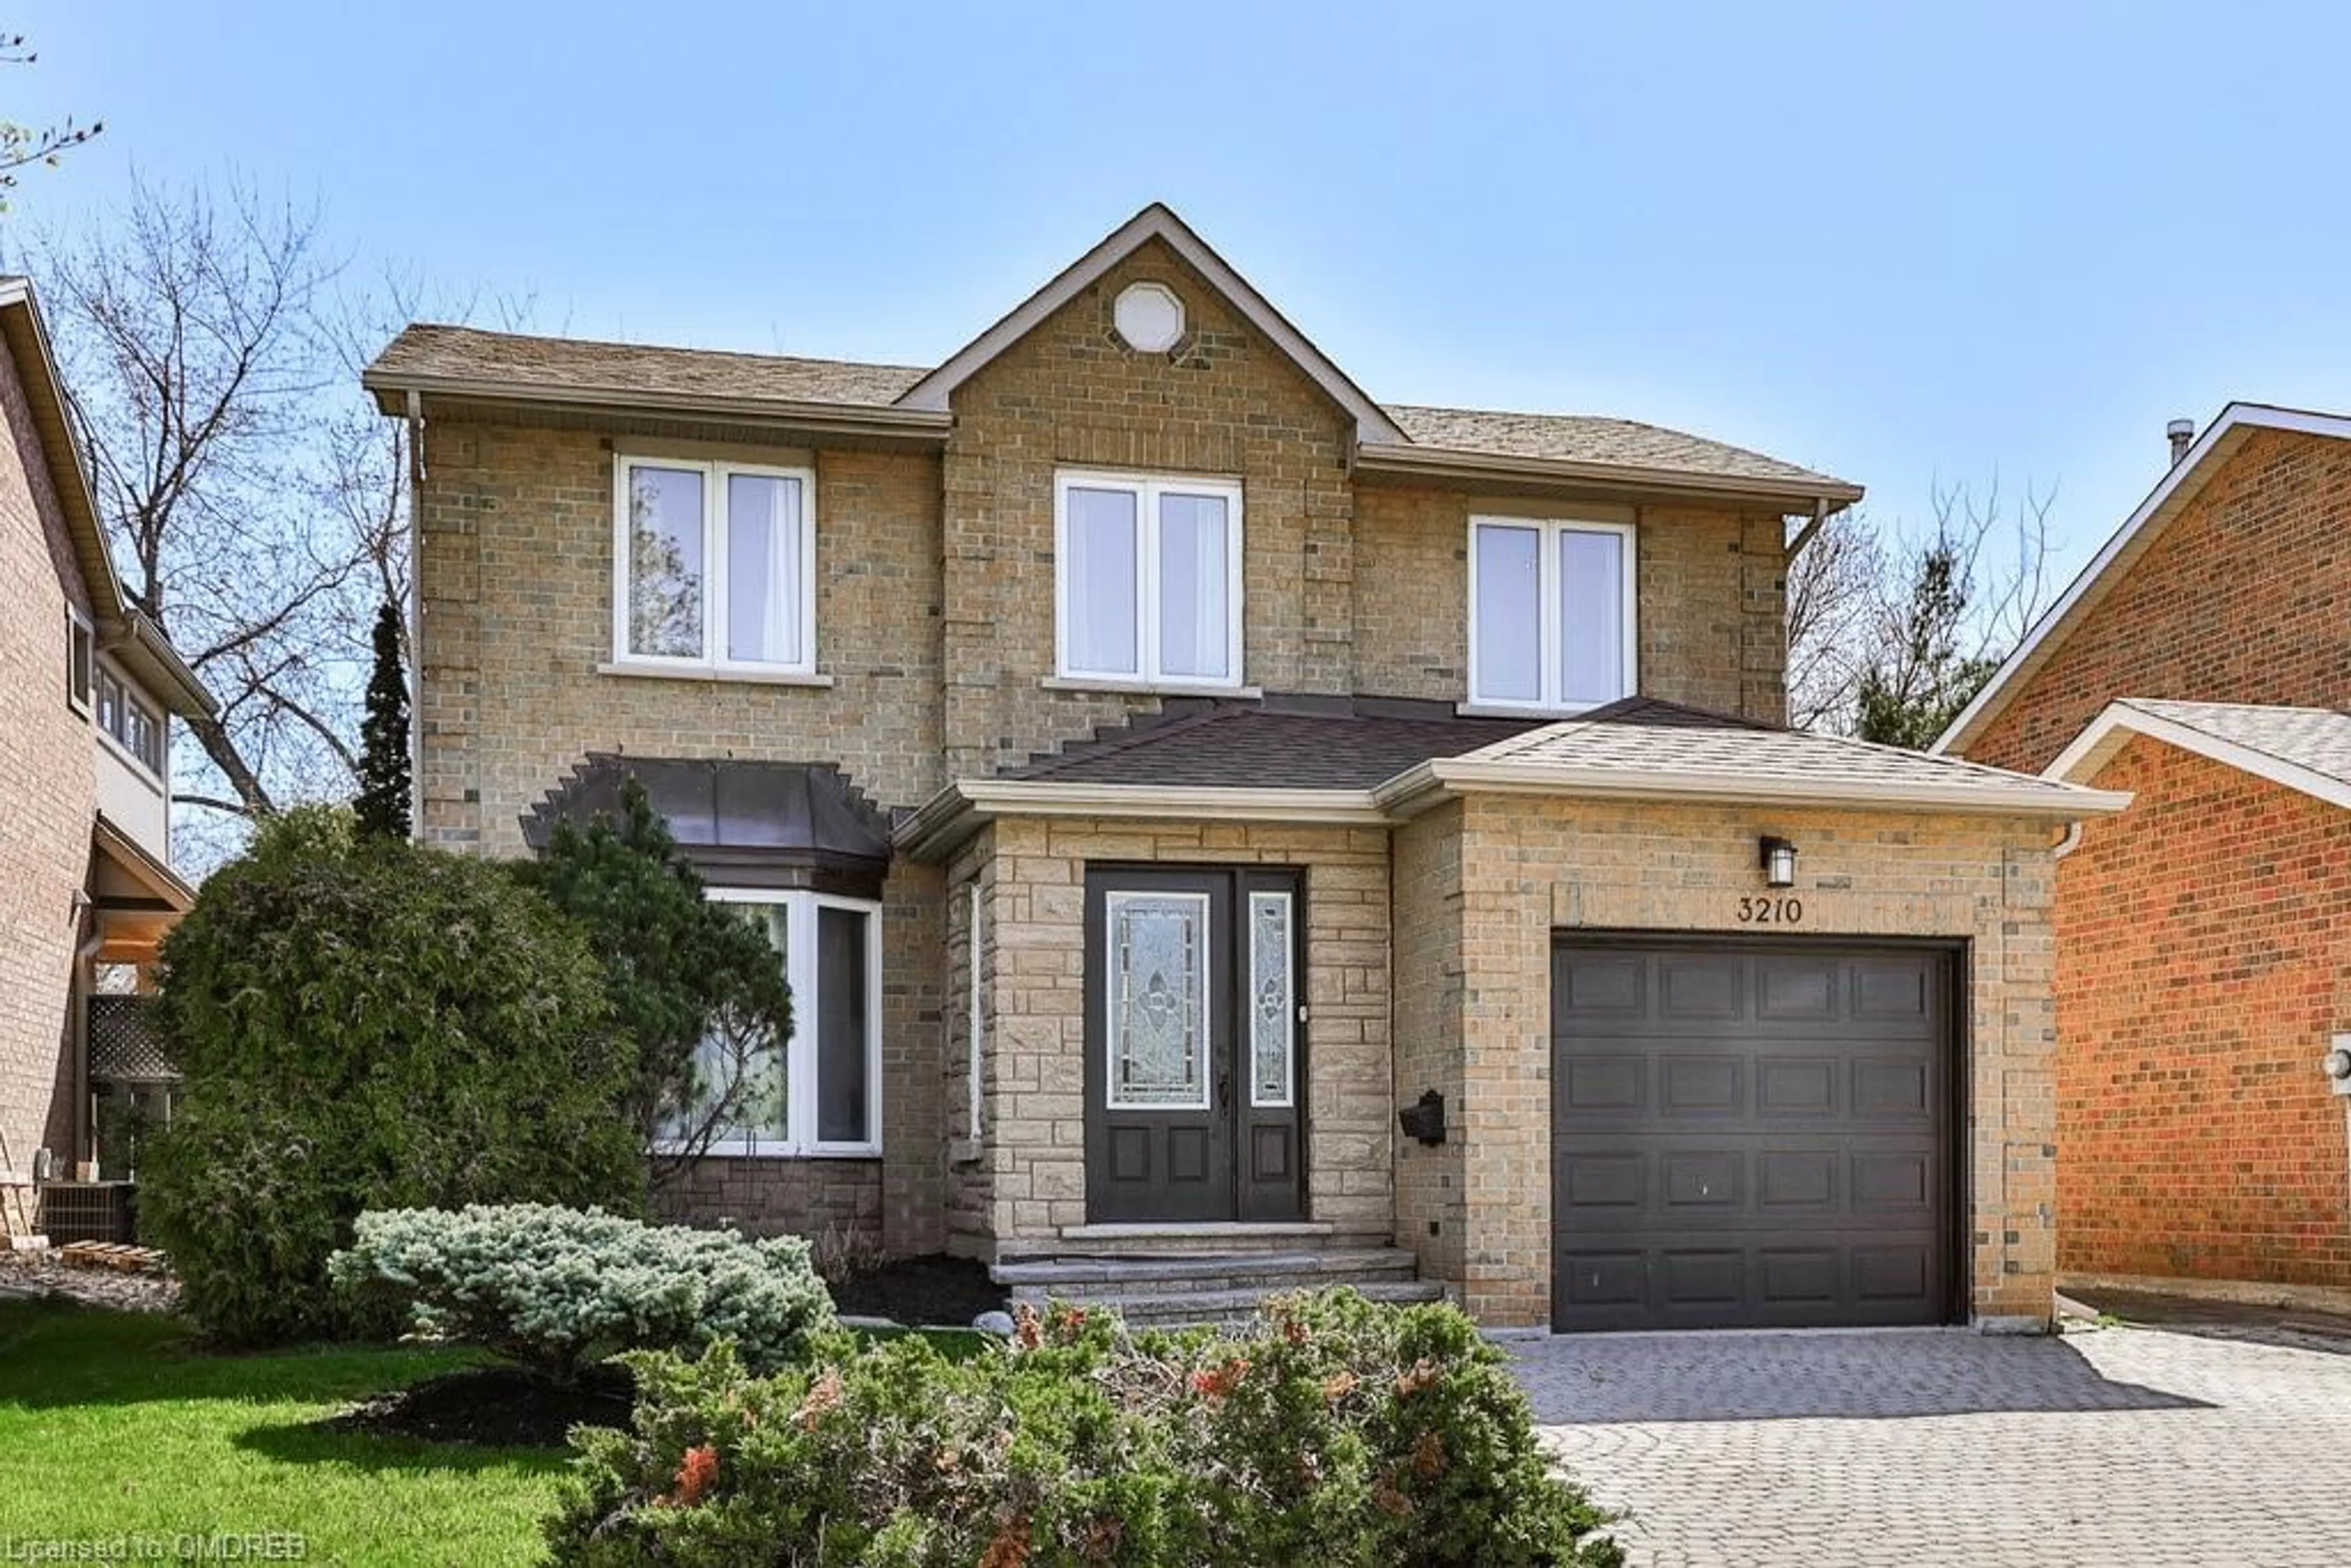 Home with brick exterior material for 3210 Victoria St, Oakville Ontario L6L 5R2